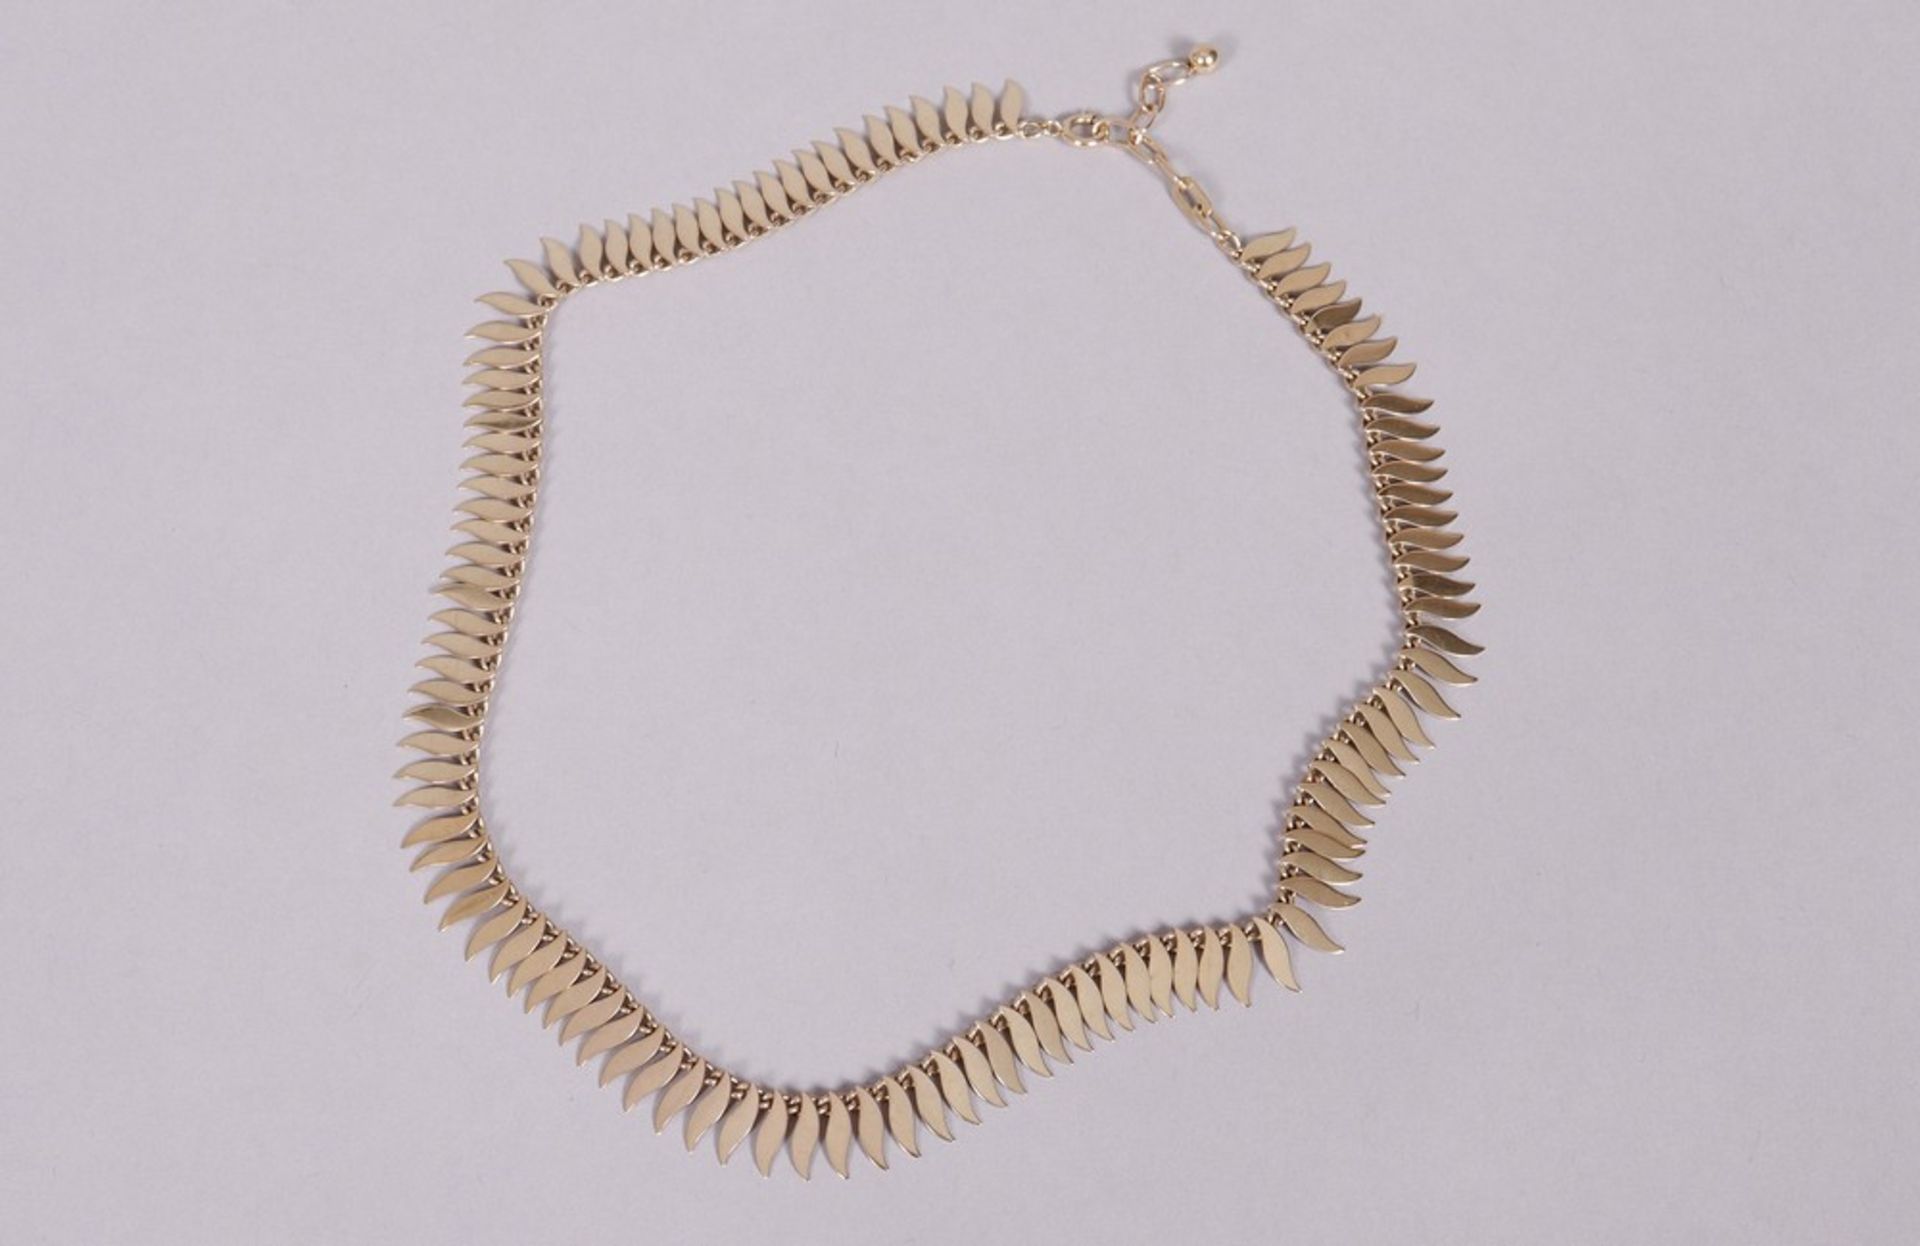 Collier, GG, 1950s - Image 3 of 4